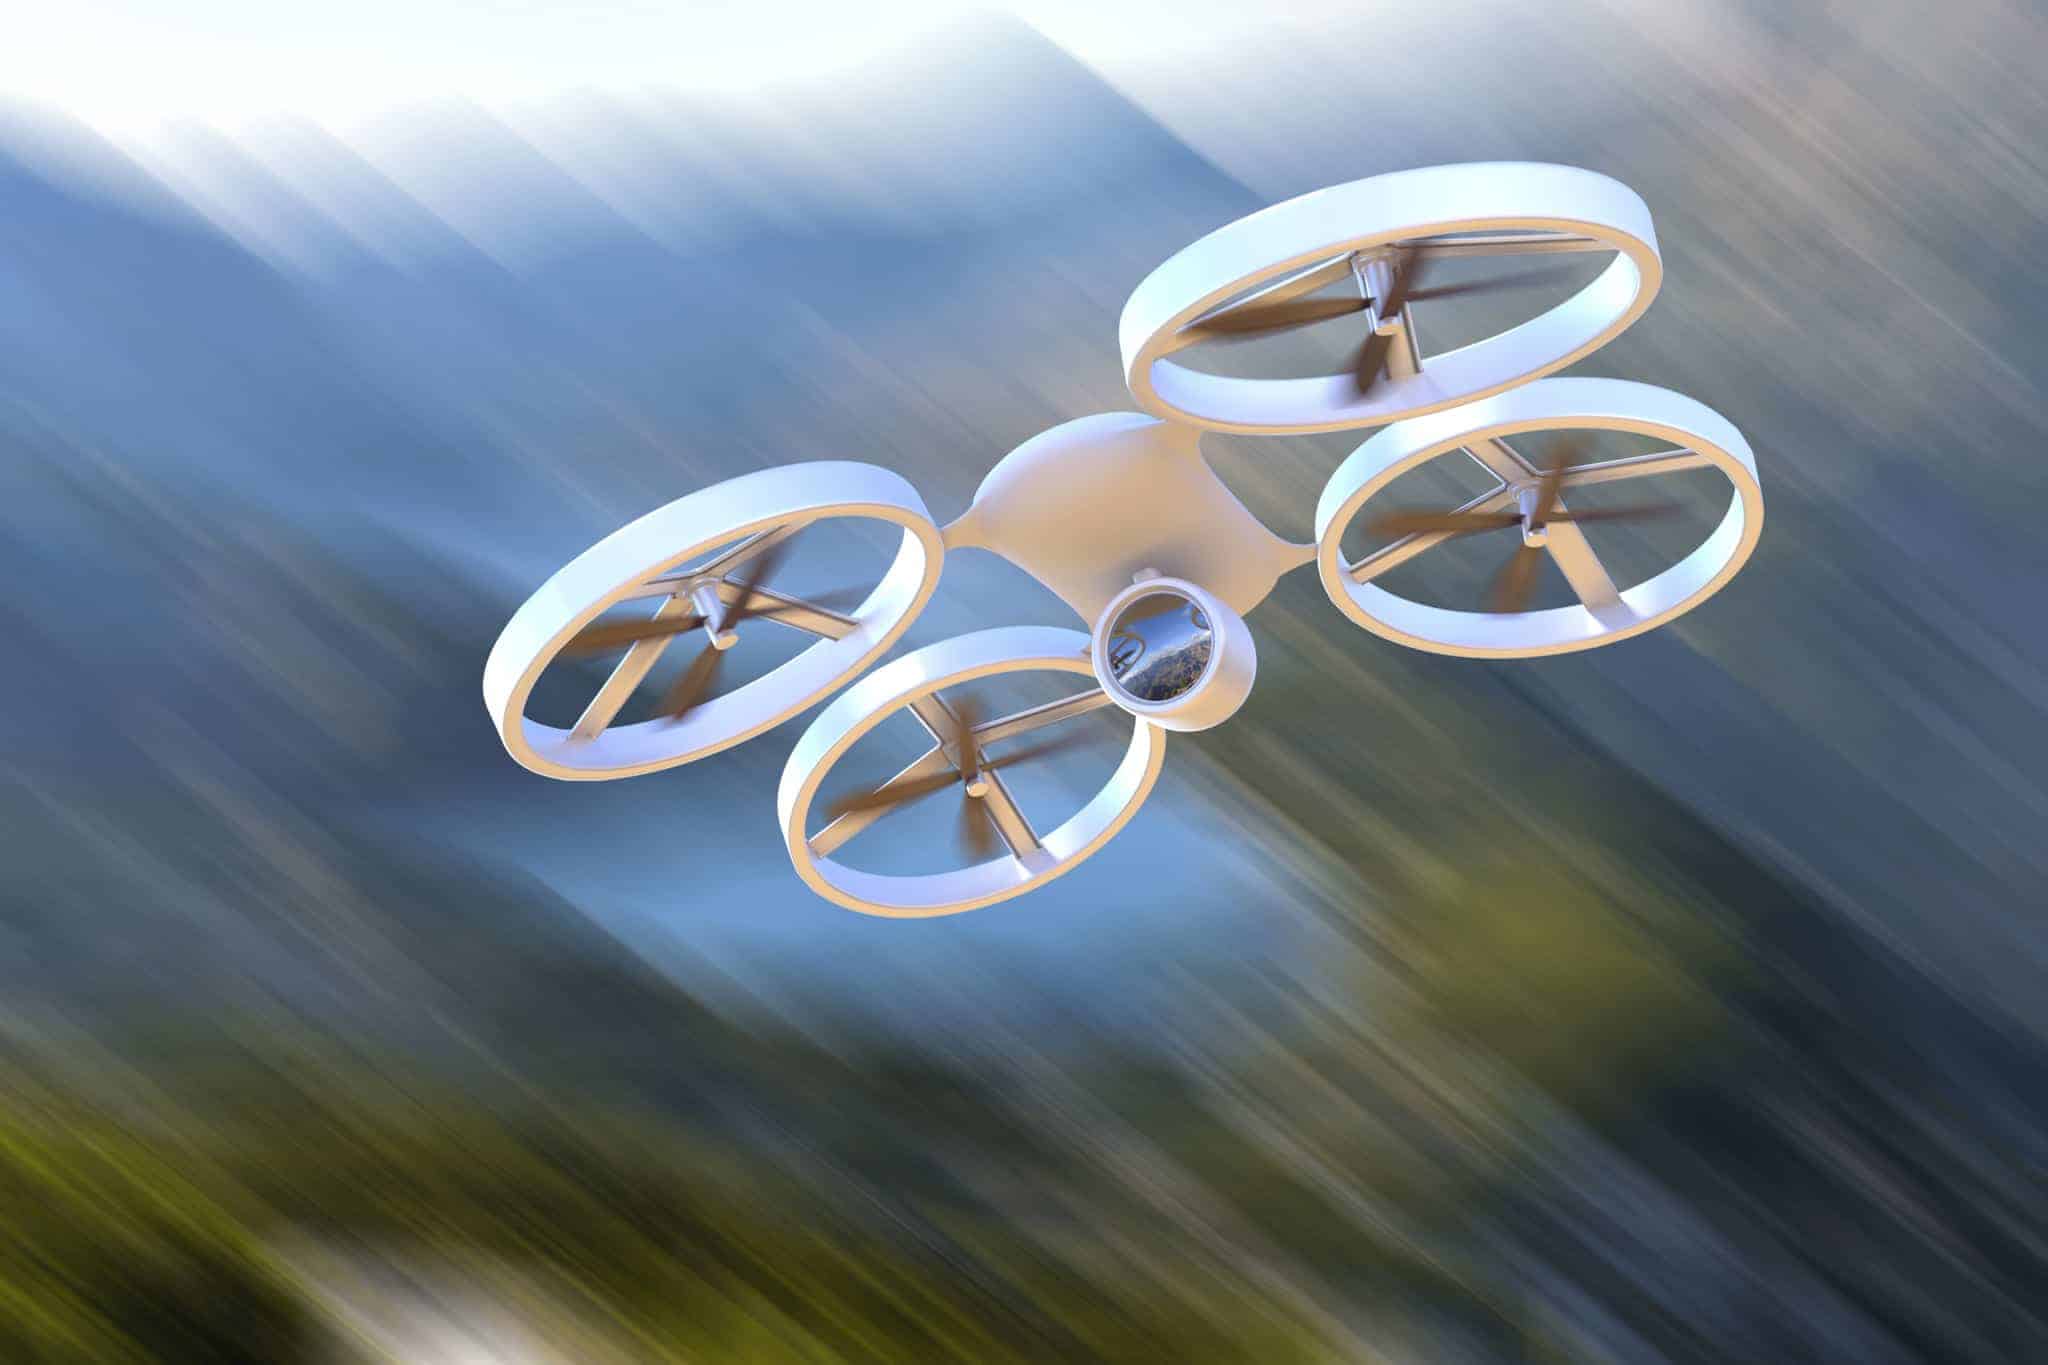 Why Drones Are the Future of the Internet of Things